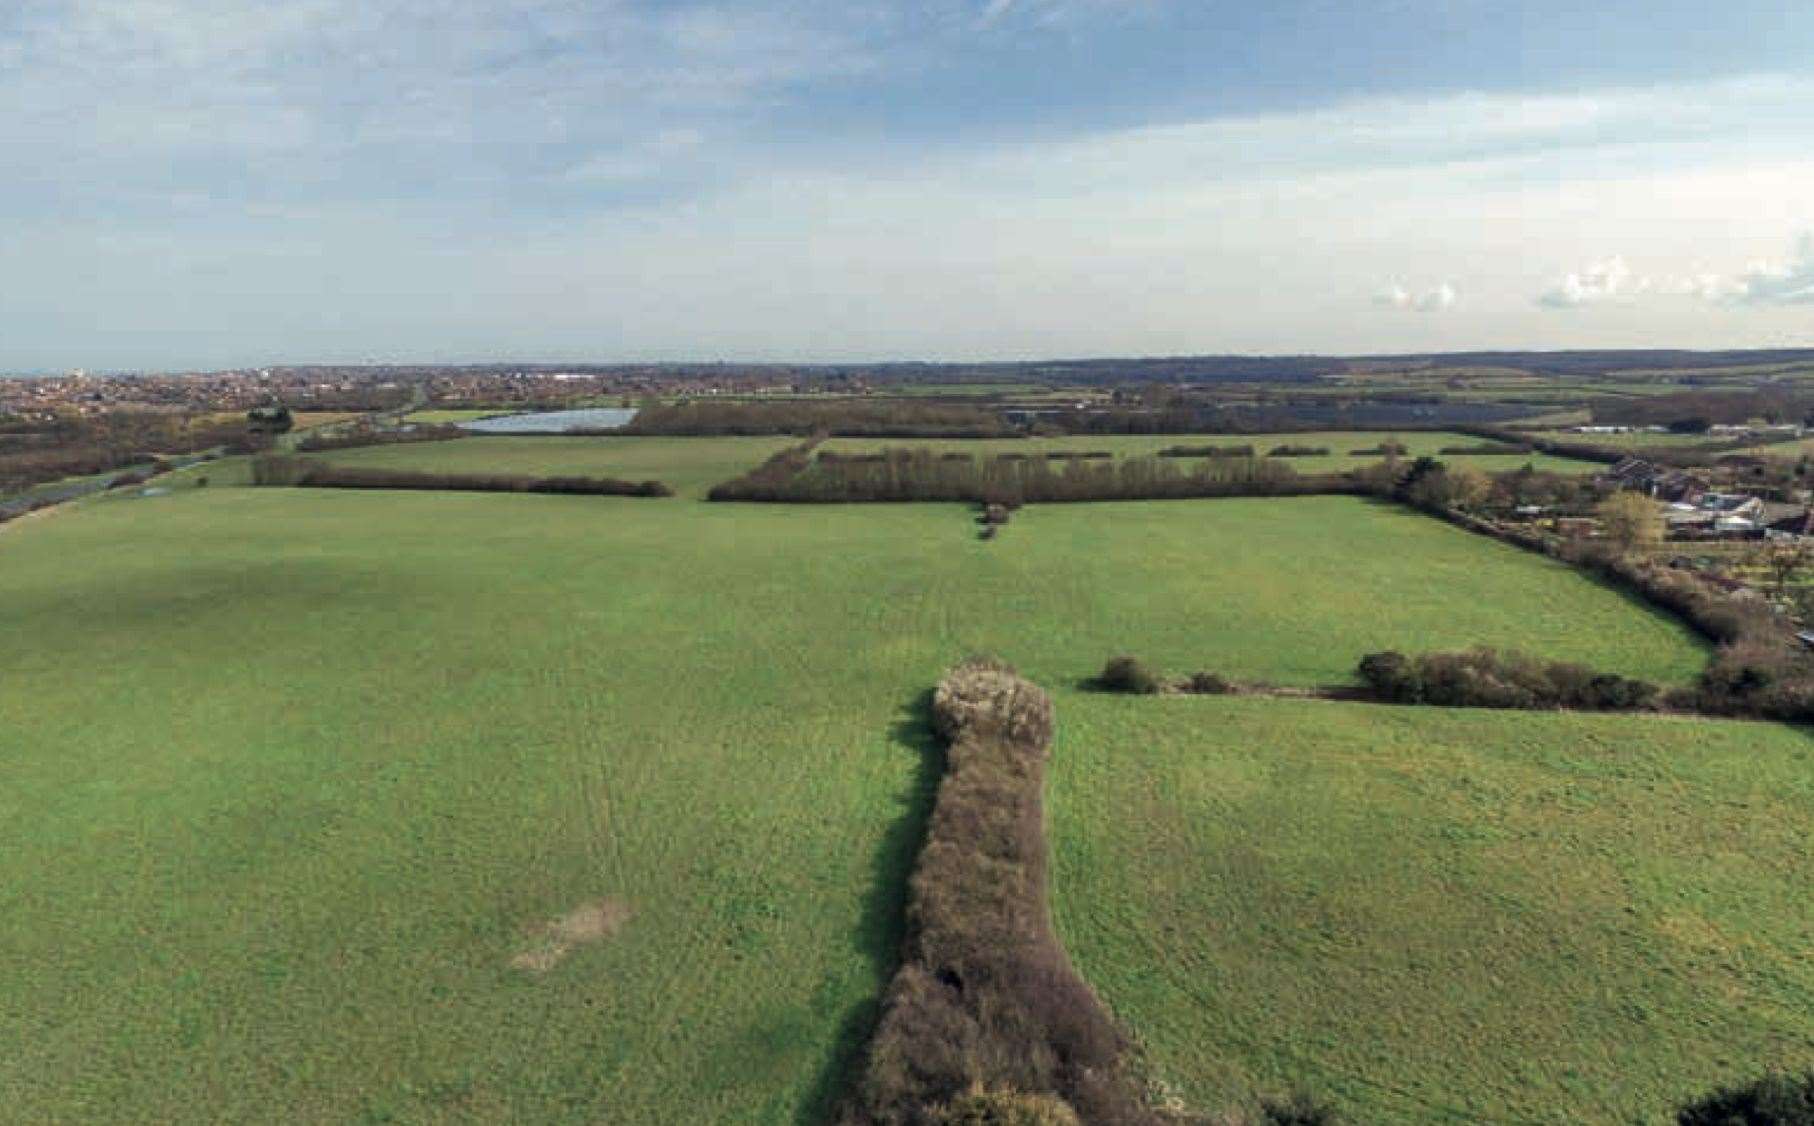 The 65-acre site at Bodkin Farm, Chestfield, which is being eyed up for housing. Pic: Strutt & Parker